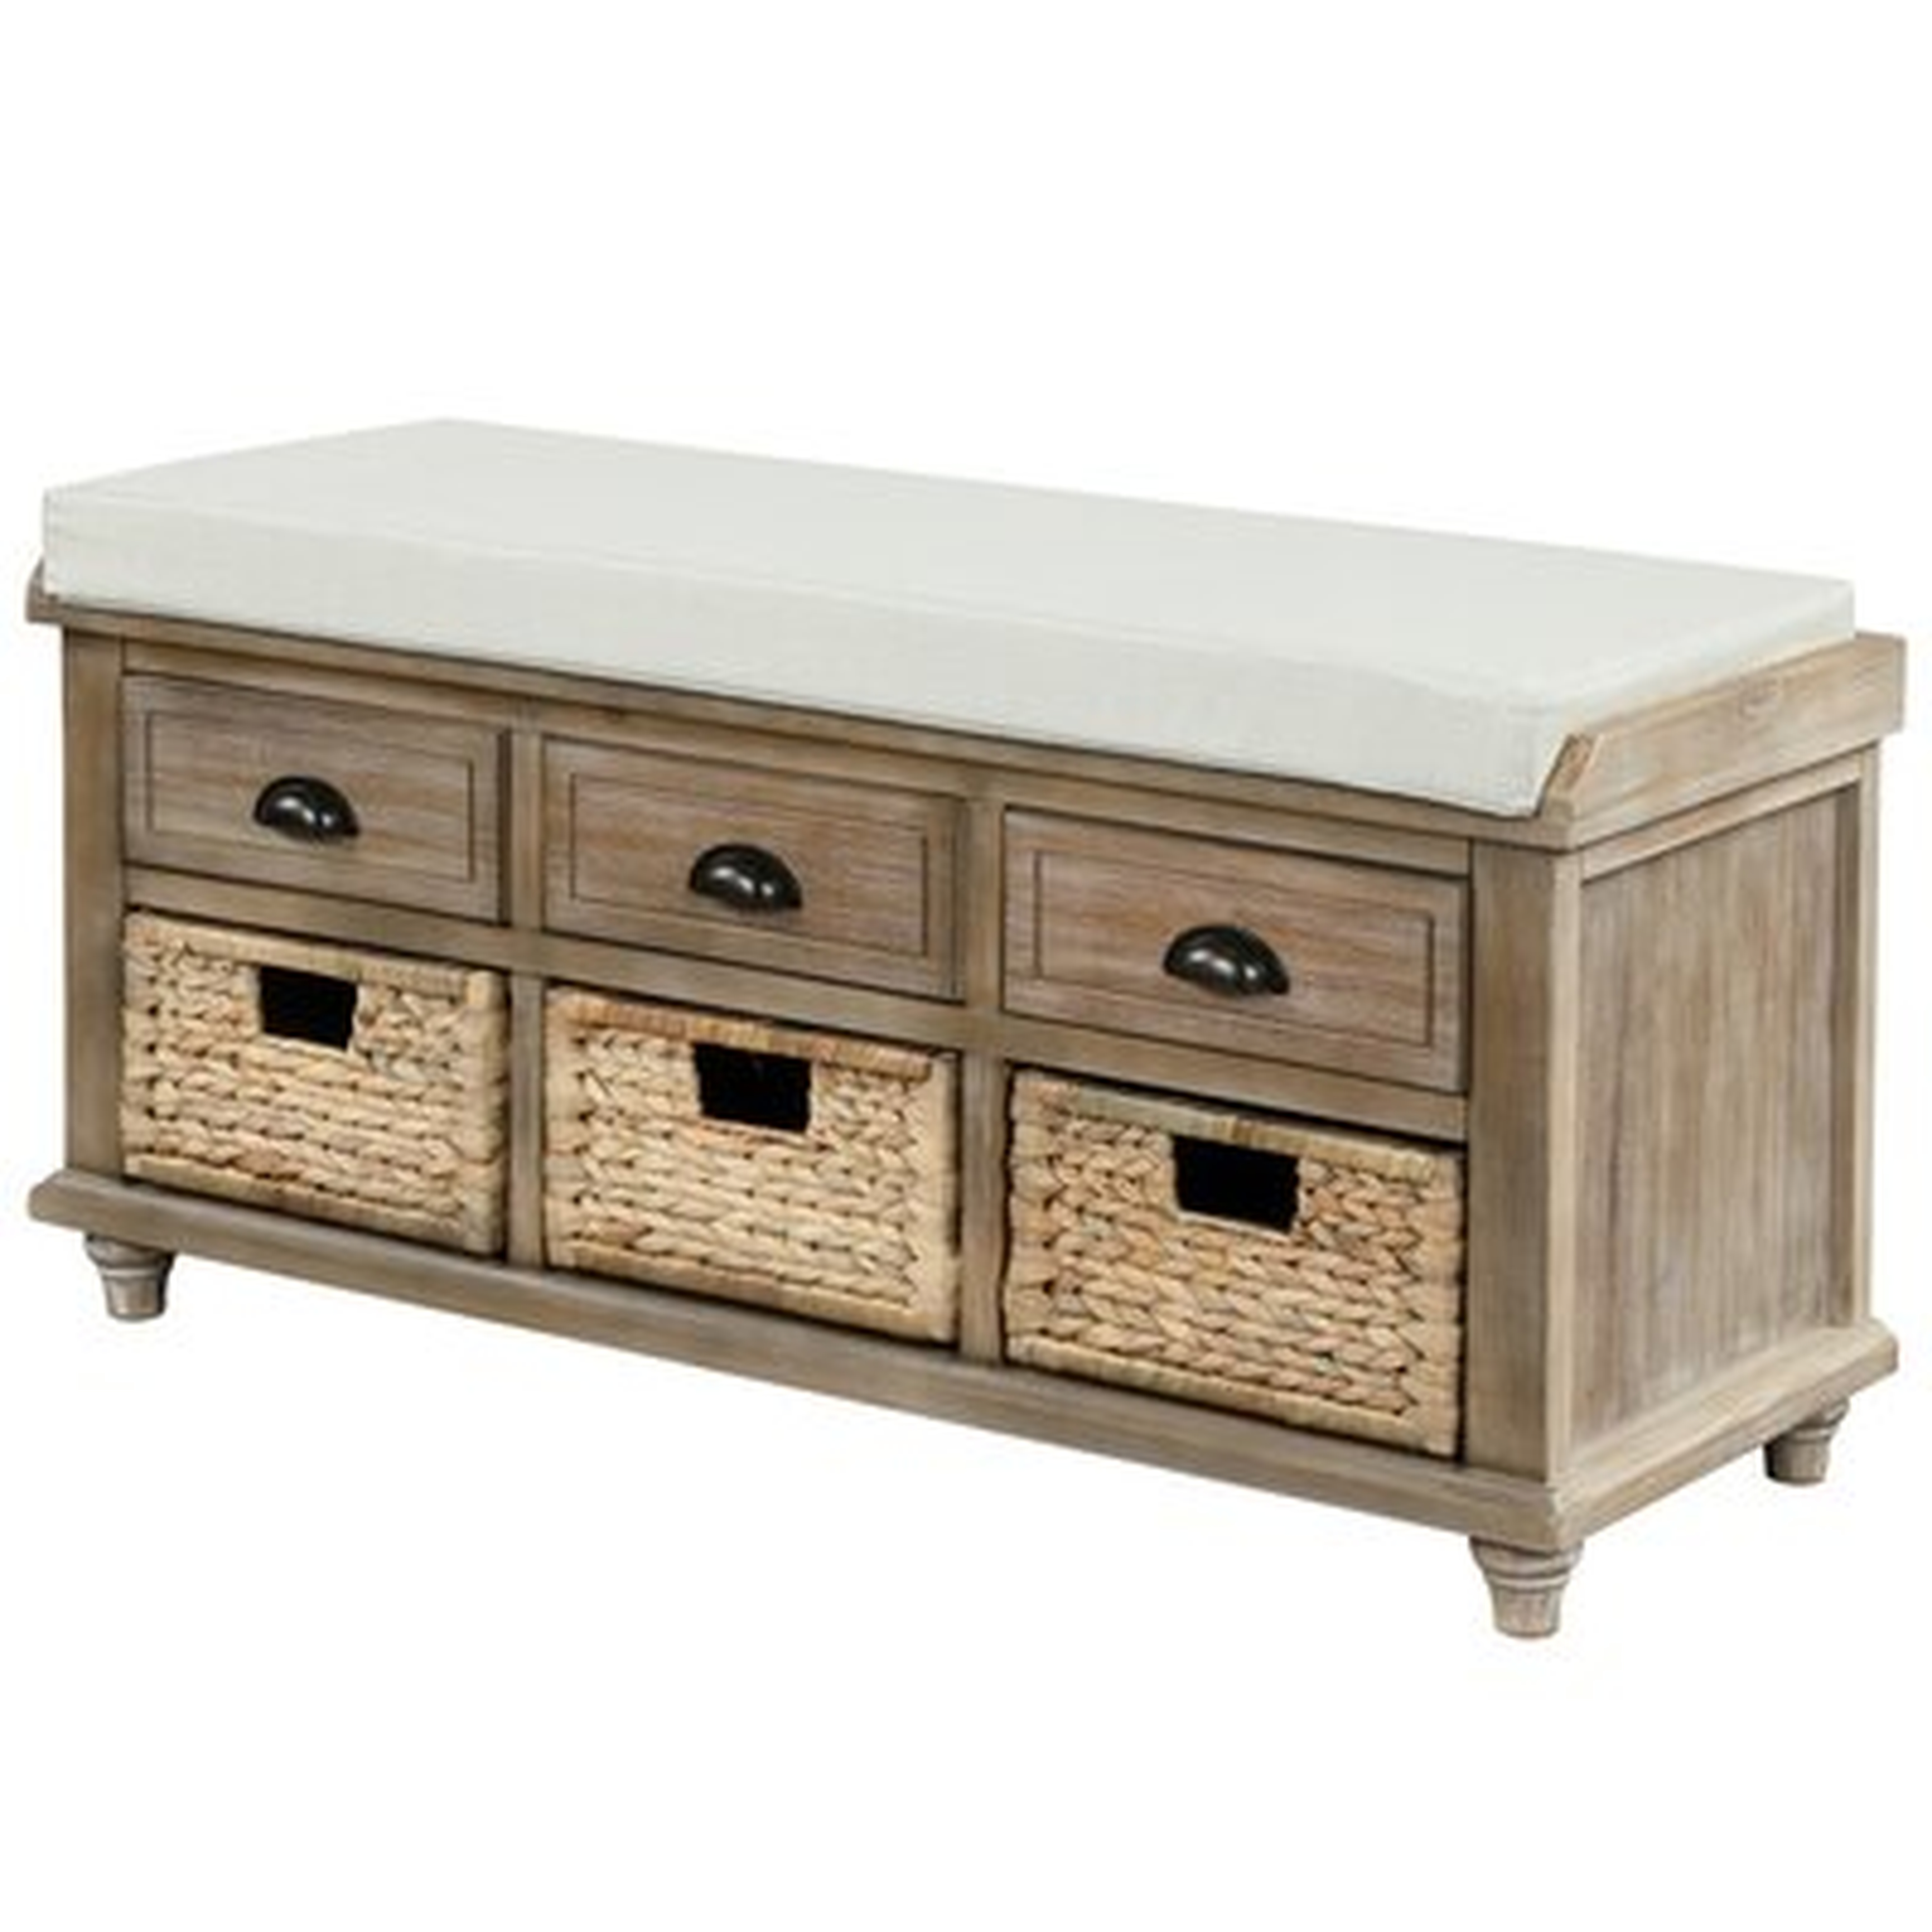 Rustic Storage Bench With 3 Drawers And 3 Rattan Baskets, Shoe Bench With Removable Cushion For Living Room, Entryway - Wayfair